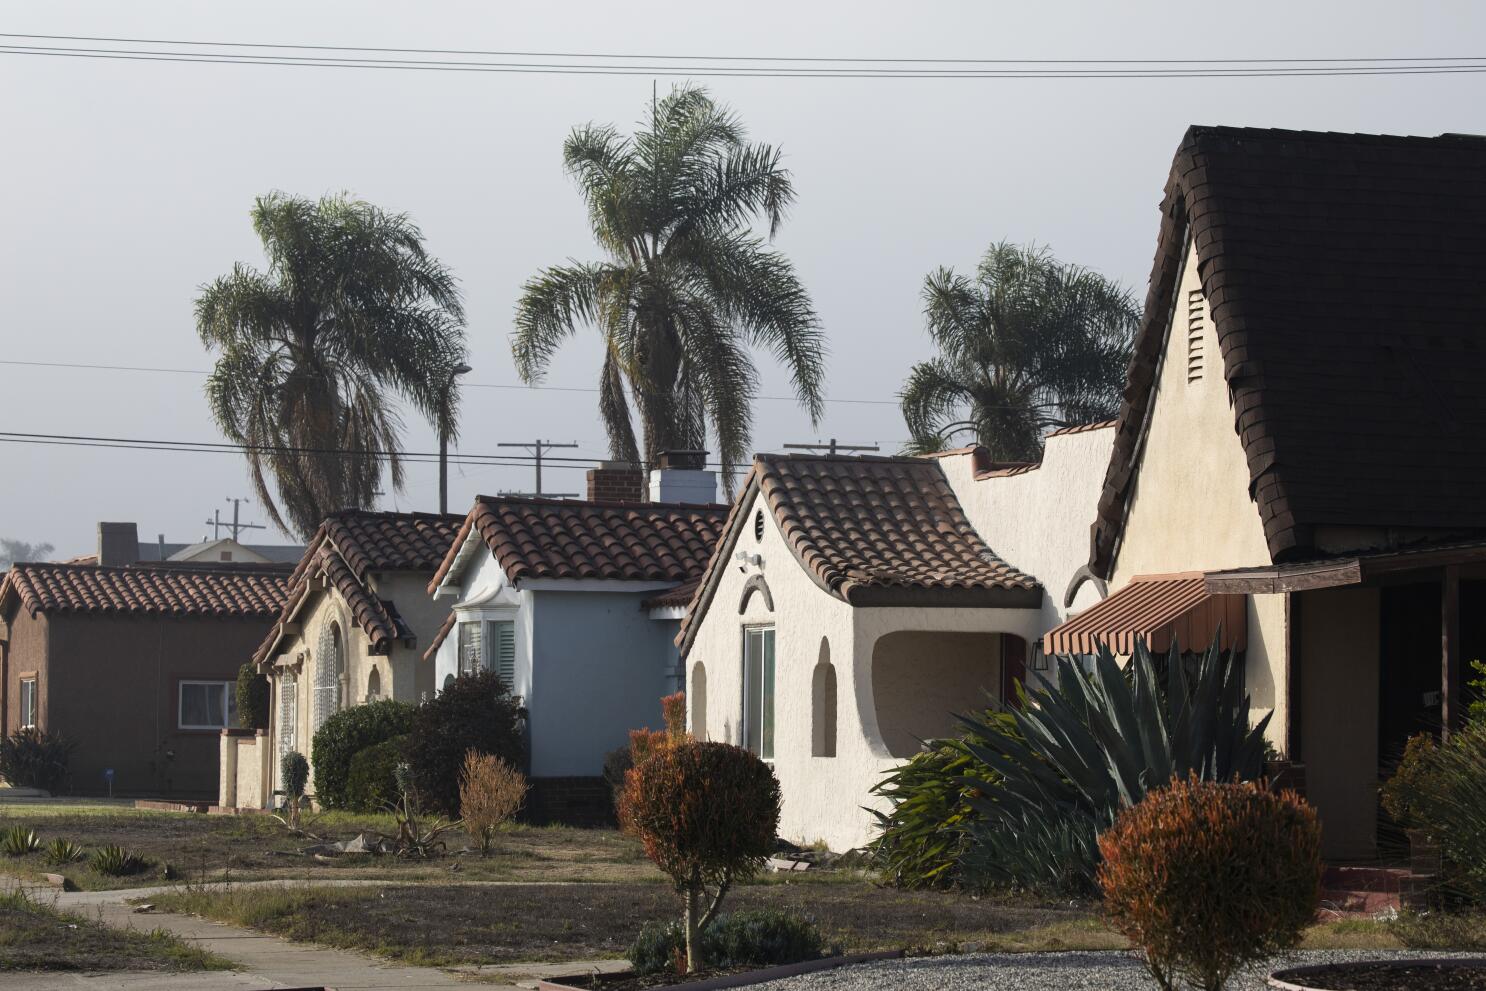 California duplex law not yet working as expected - Los Angeles Times